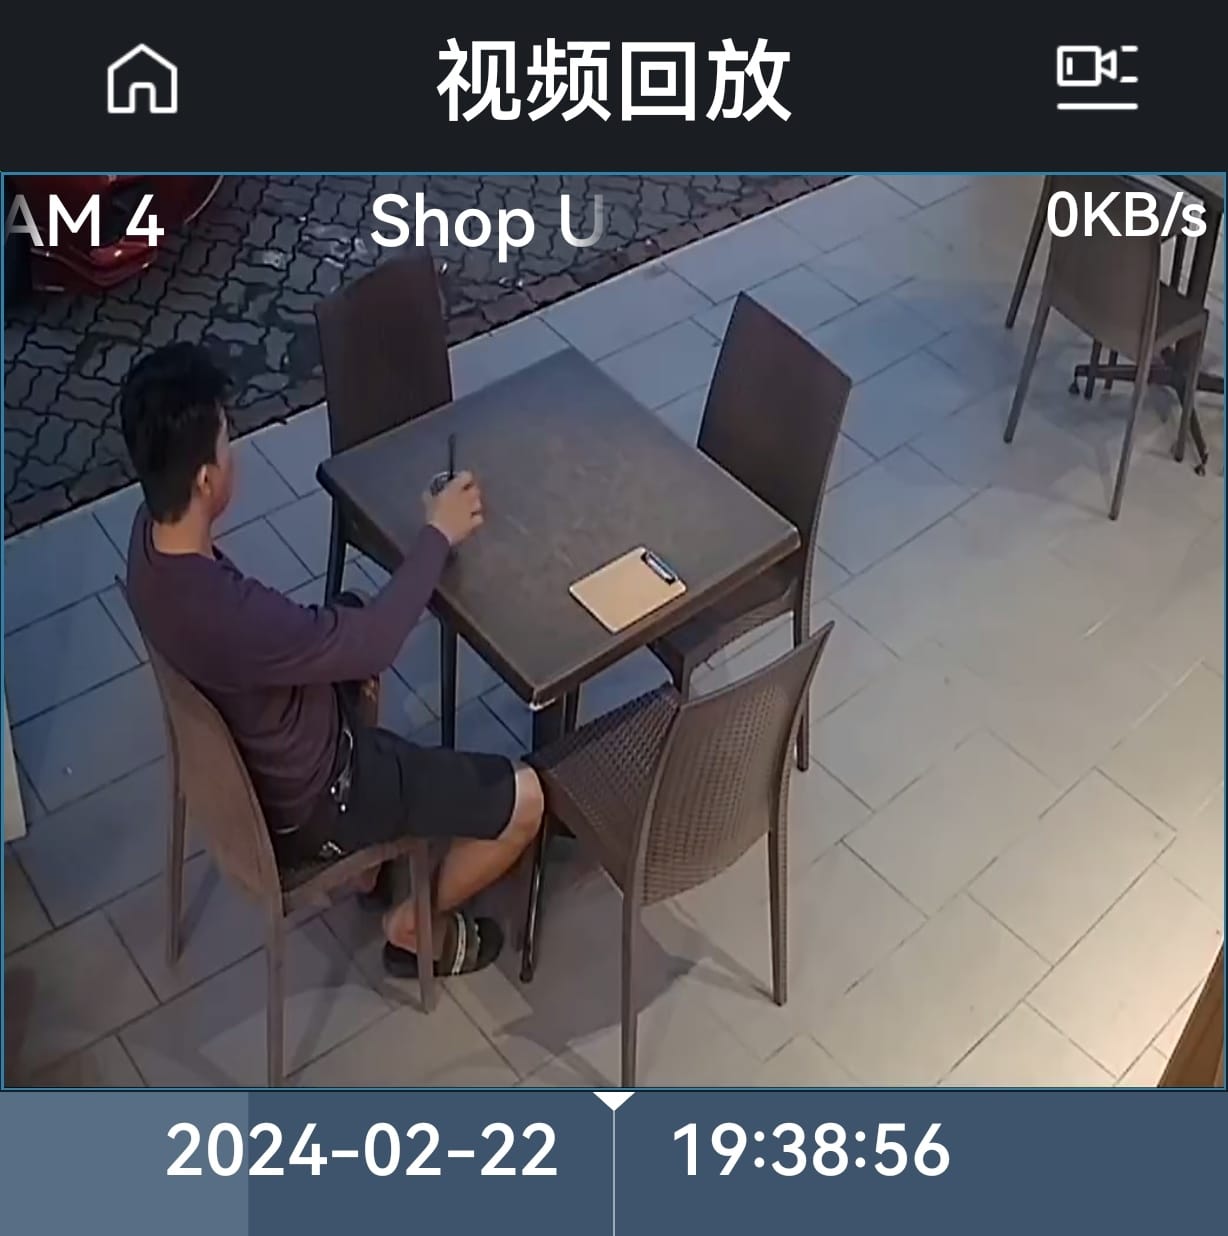 Customer sitting at table outside a restaurant